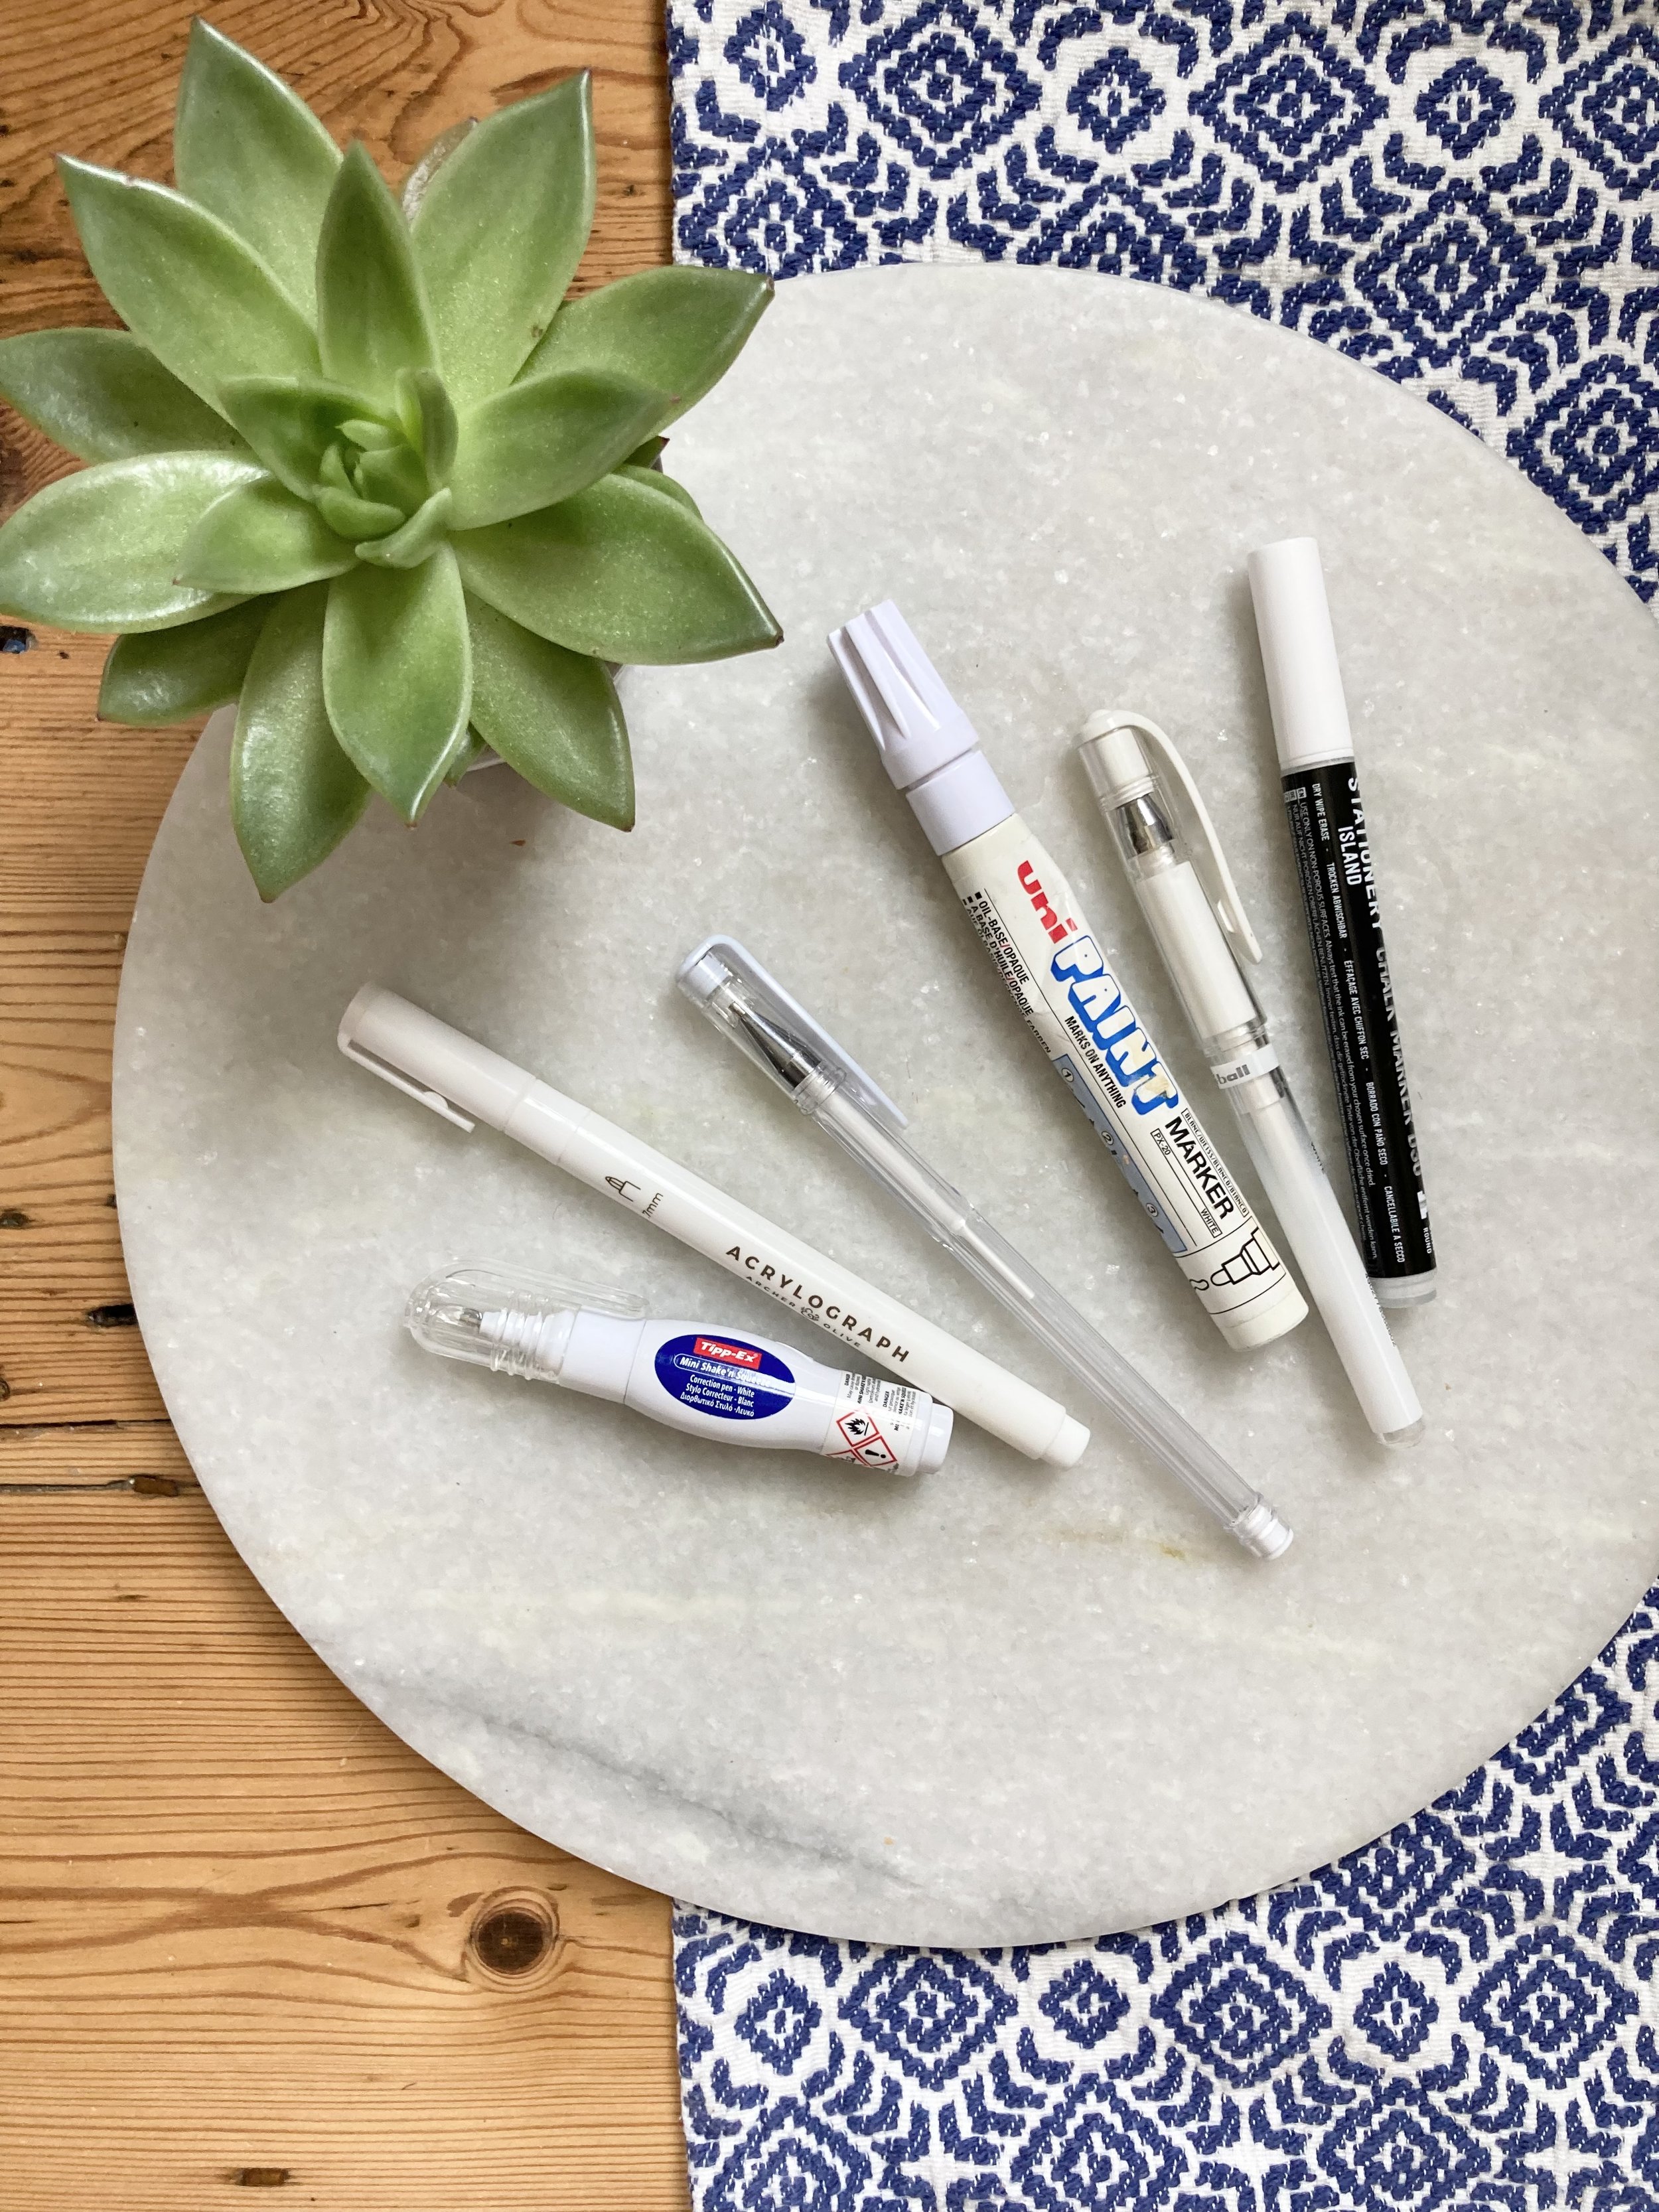 The Best (and Worst) White Pens for Drawing: The Ultimate White Pen Test!